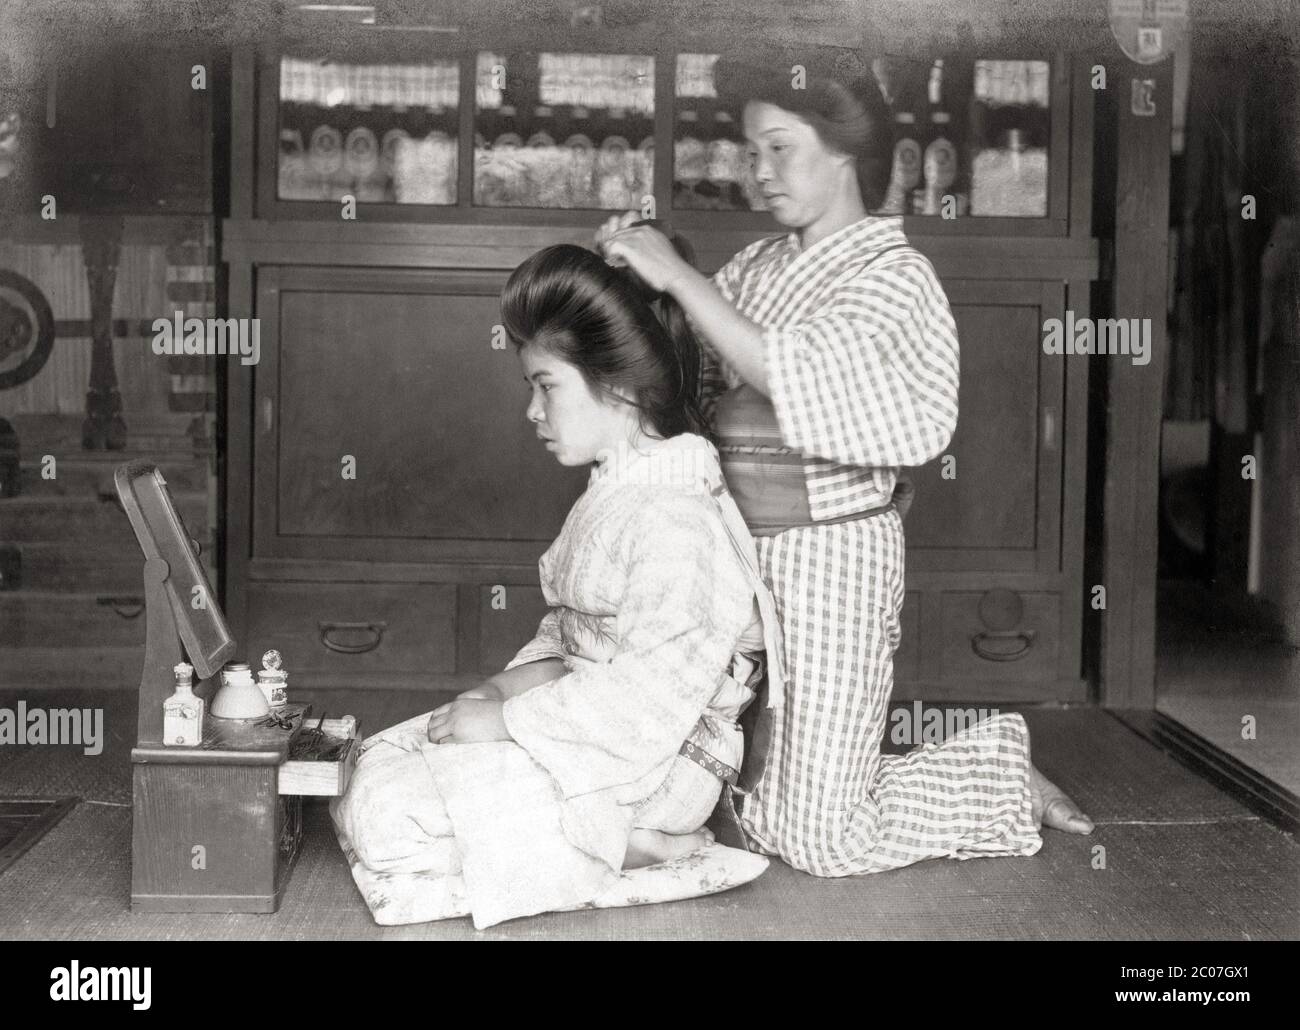 [ 1910s Japan - Hairdresser at Work ] — A woman dressed in a kimono and facing a mirror has her hair done by a hairdresser.  20th century vintage gelatin silver print. Stock Photo